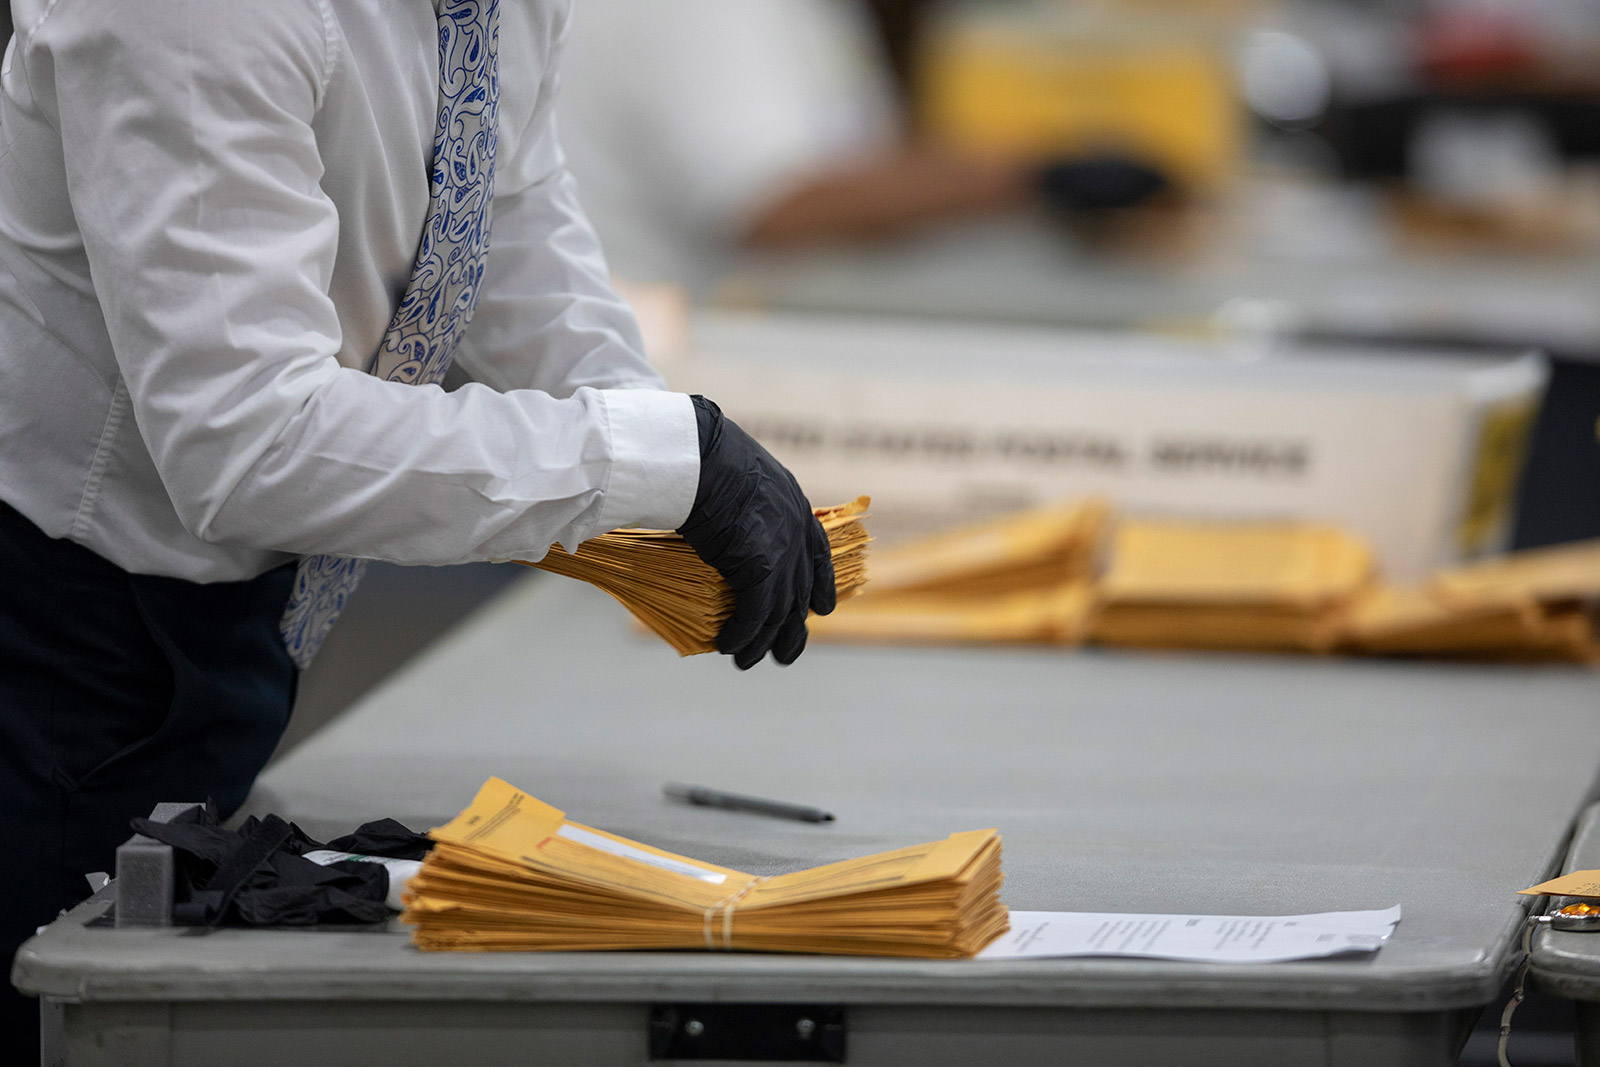 A worker sorts through absentee ballots in Detroit on November 4.